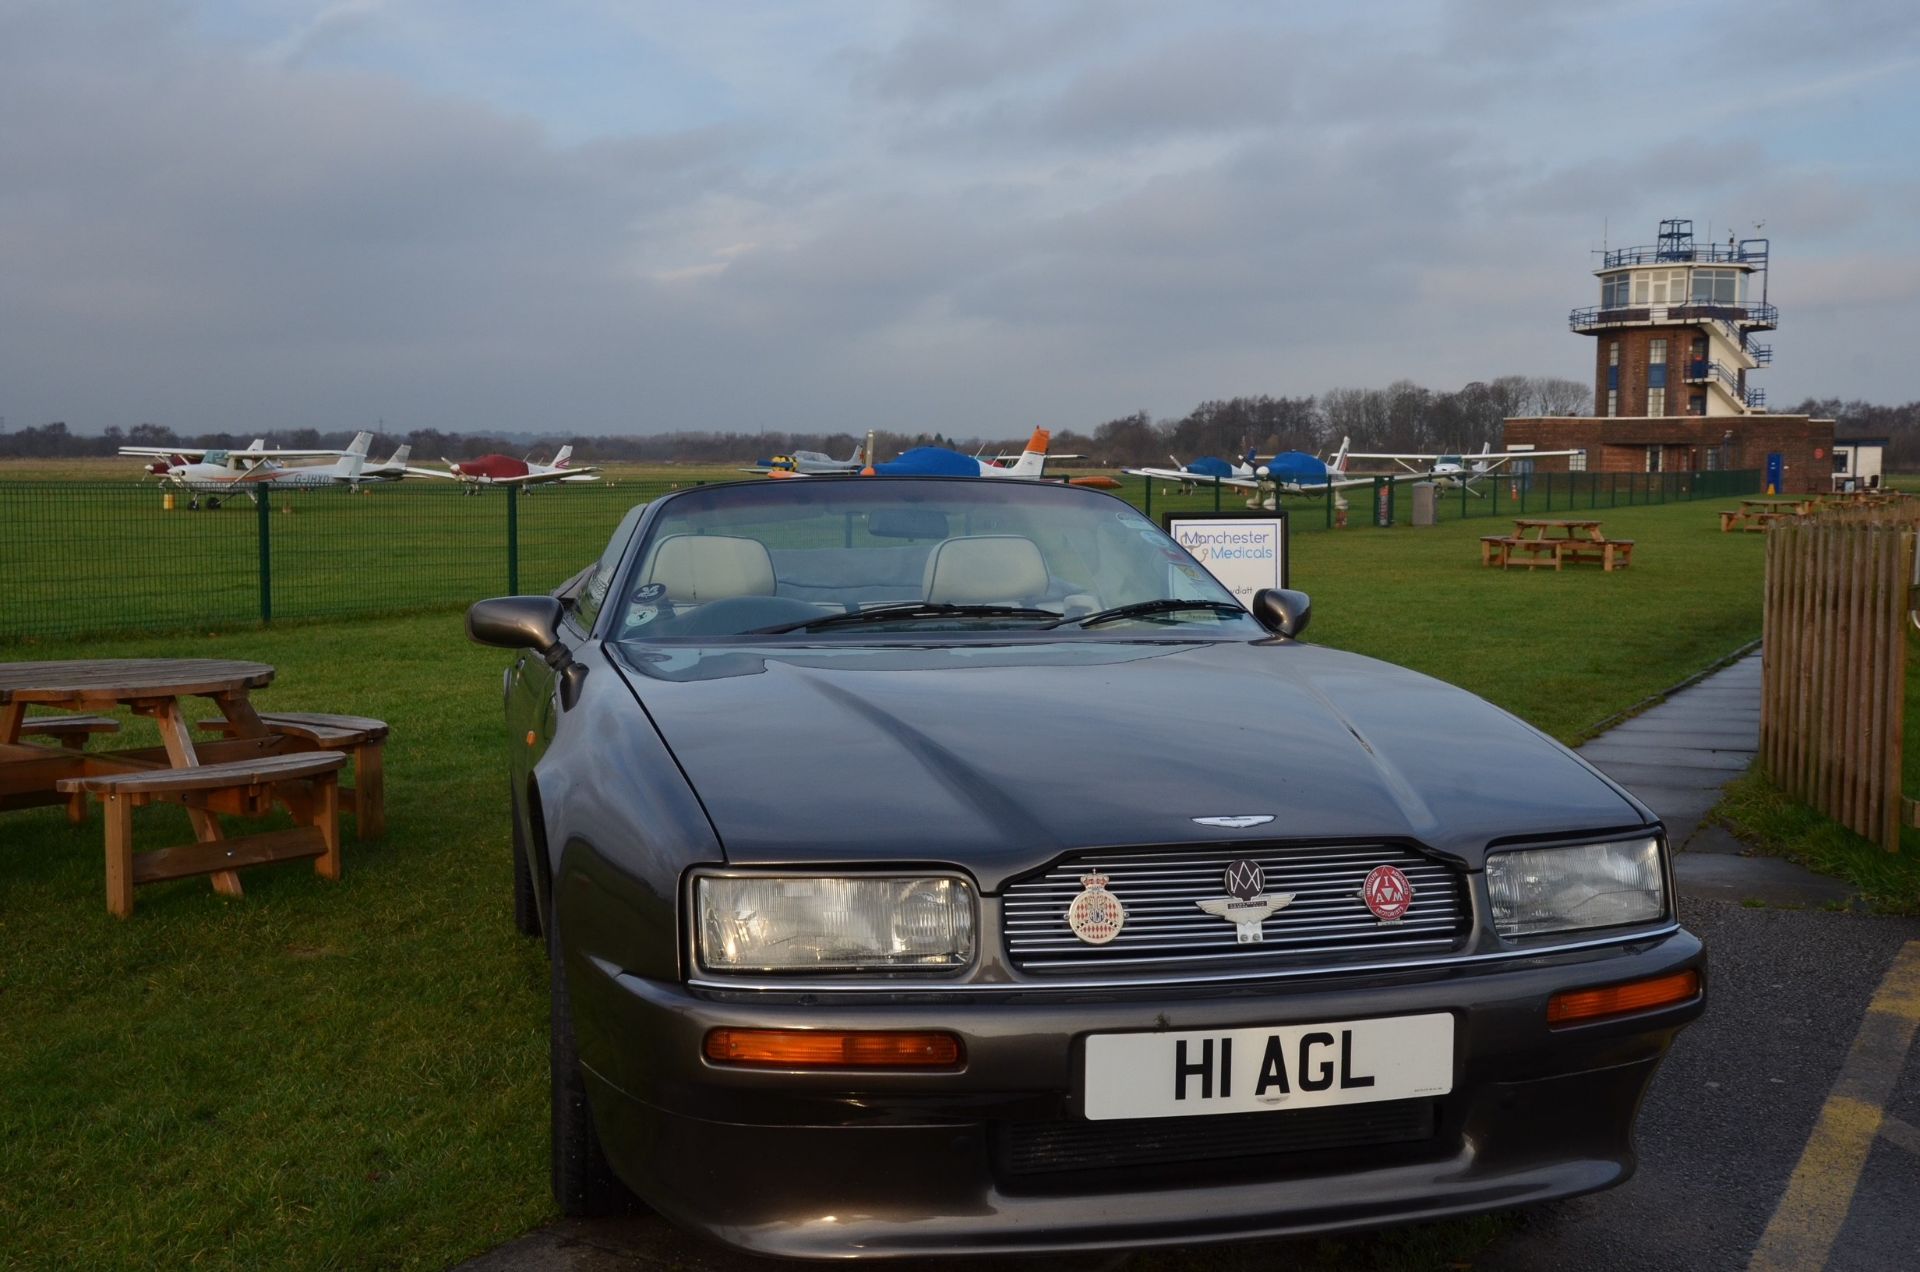 1993 Aston Martin Virage Volante - Having 11 months MOT and aviators number plate H1 AGL - Image 16 of 48